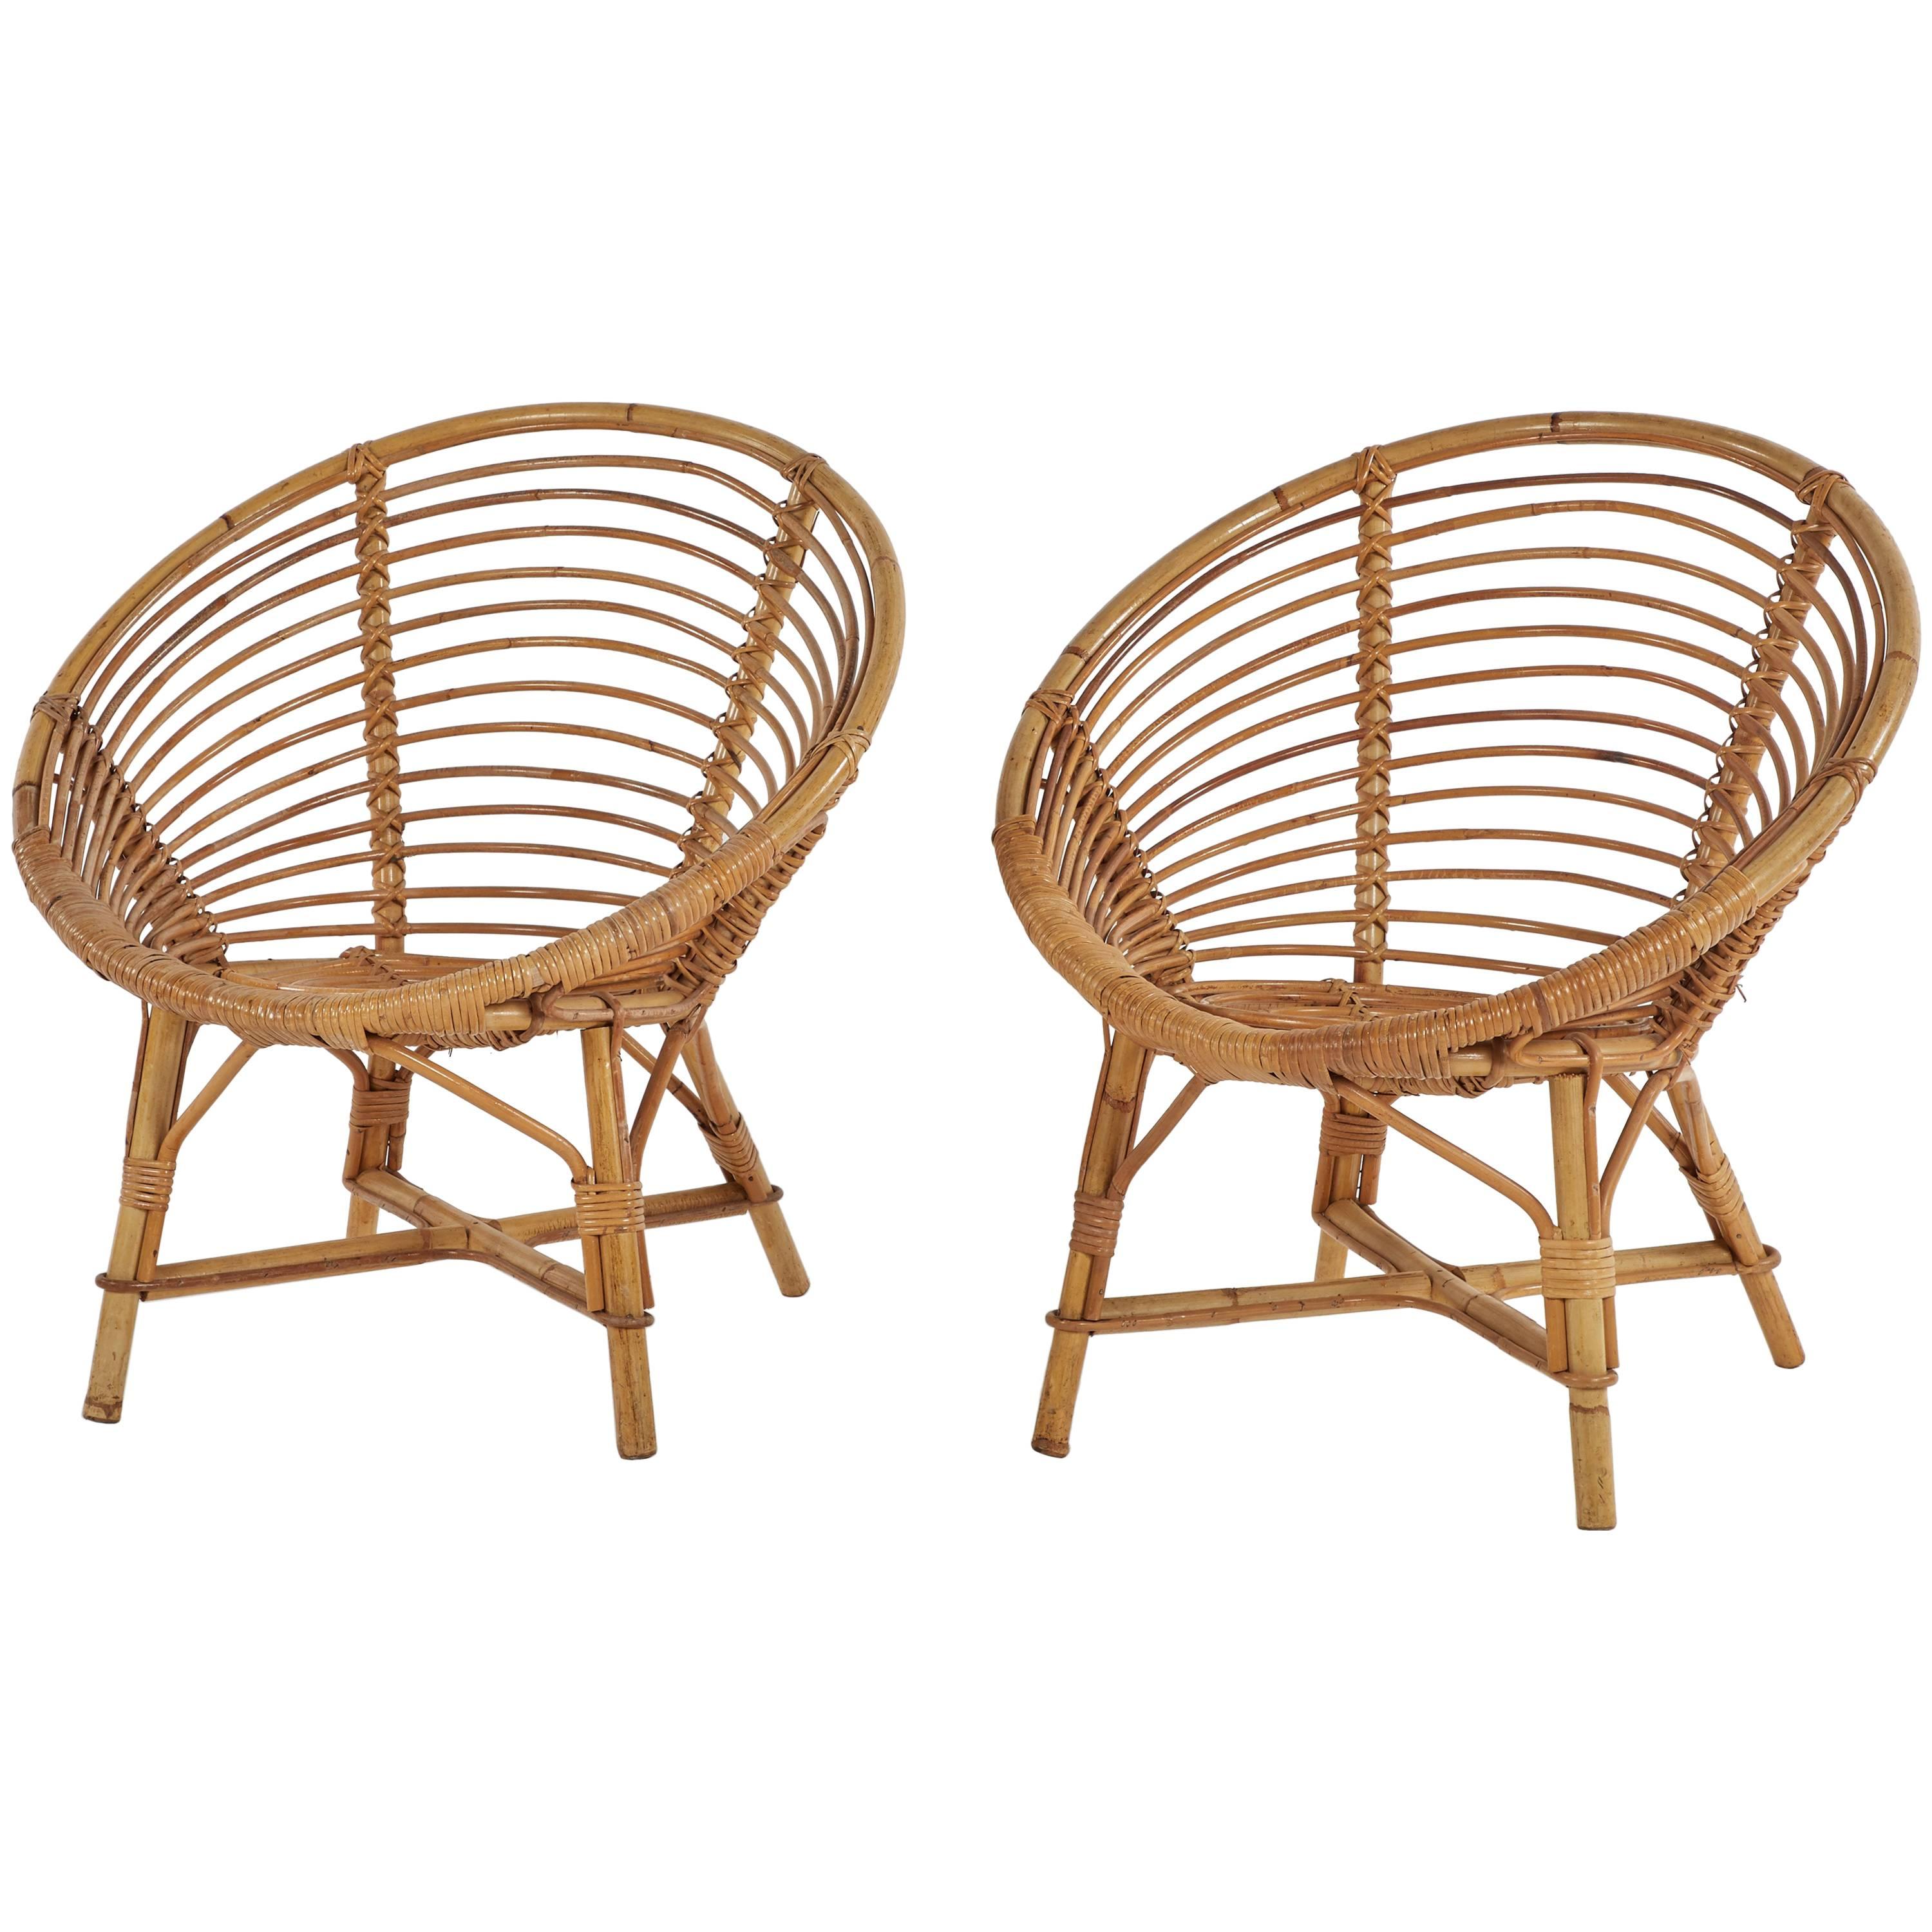 Pair of Mid-Century Bamboo Rattan Chairs from France